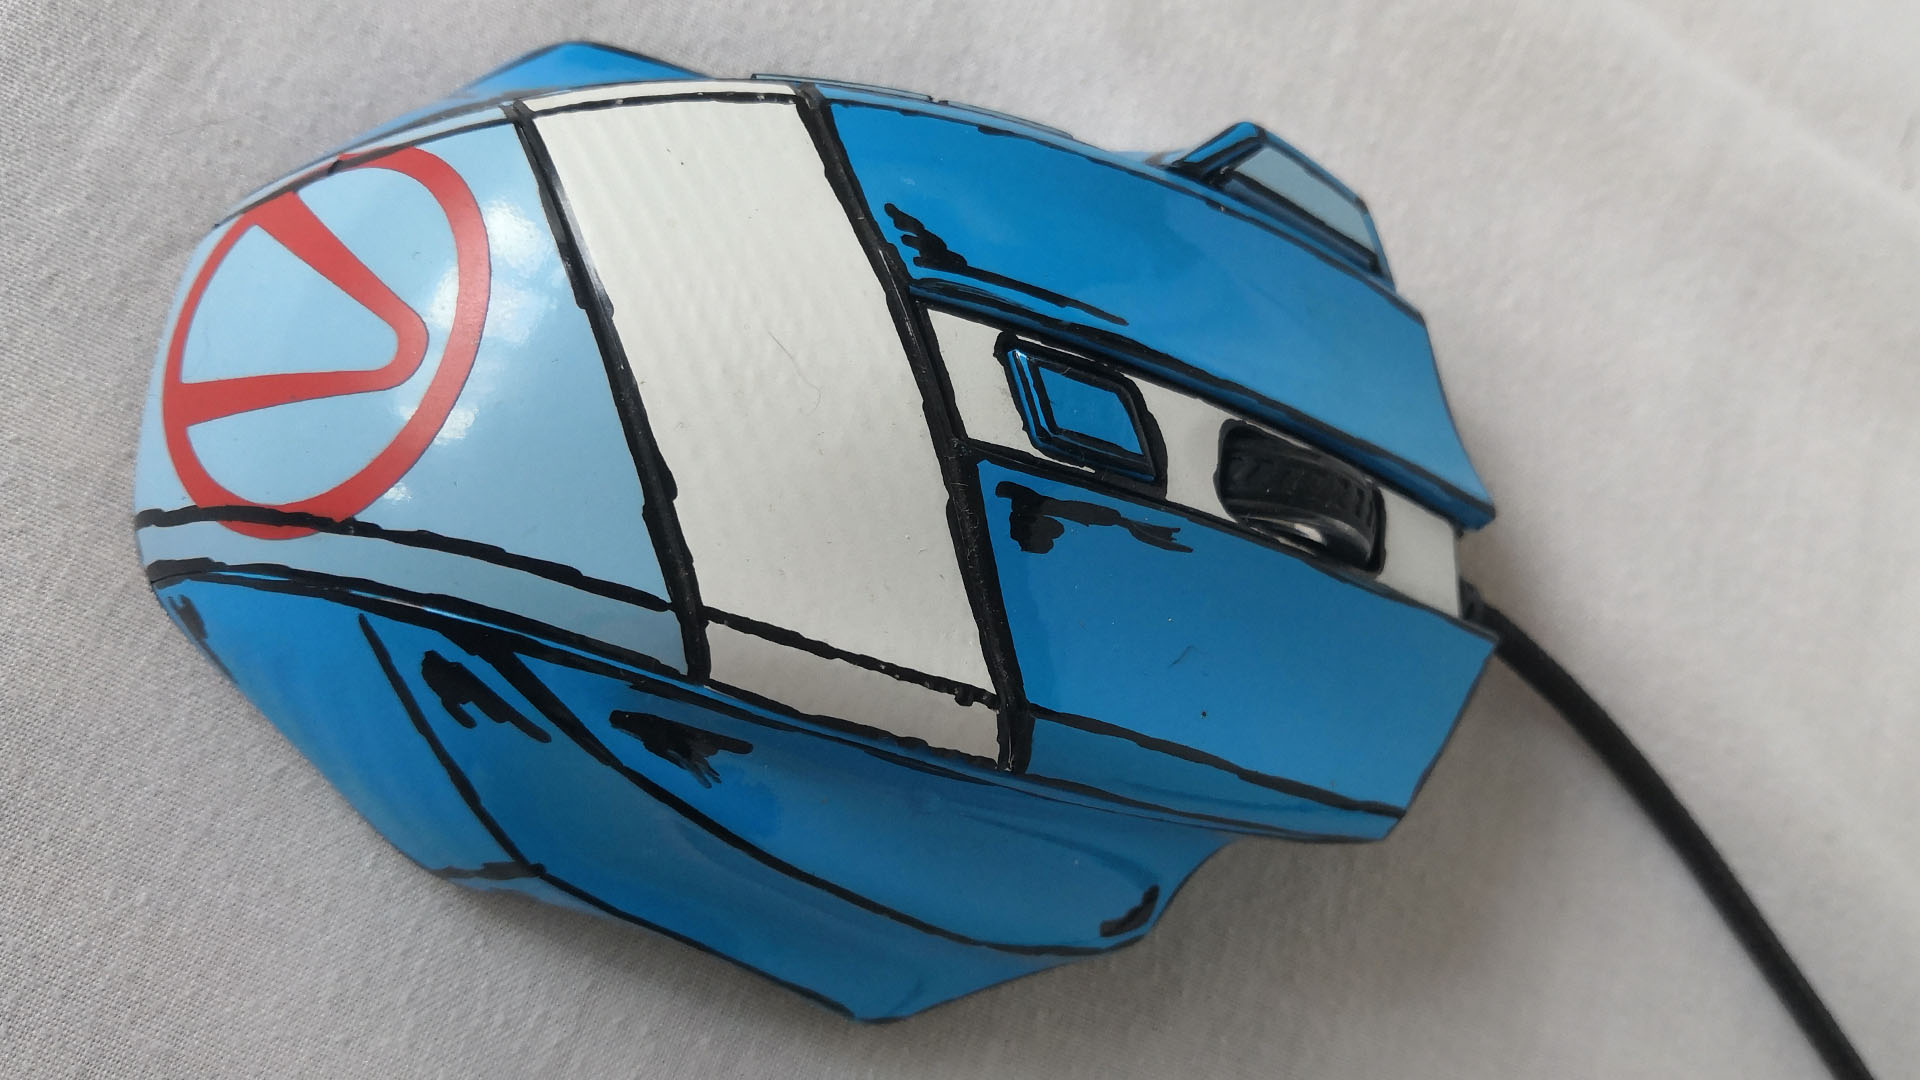 The Borderlands gaming mouse wrapped in blue vinyl